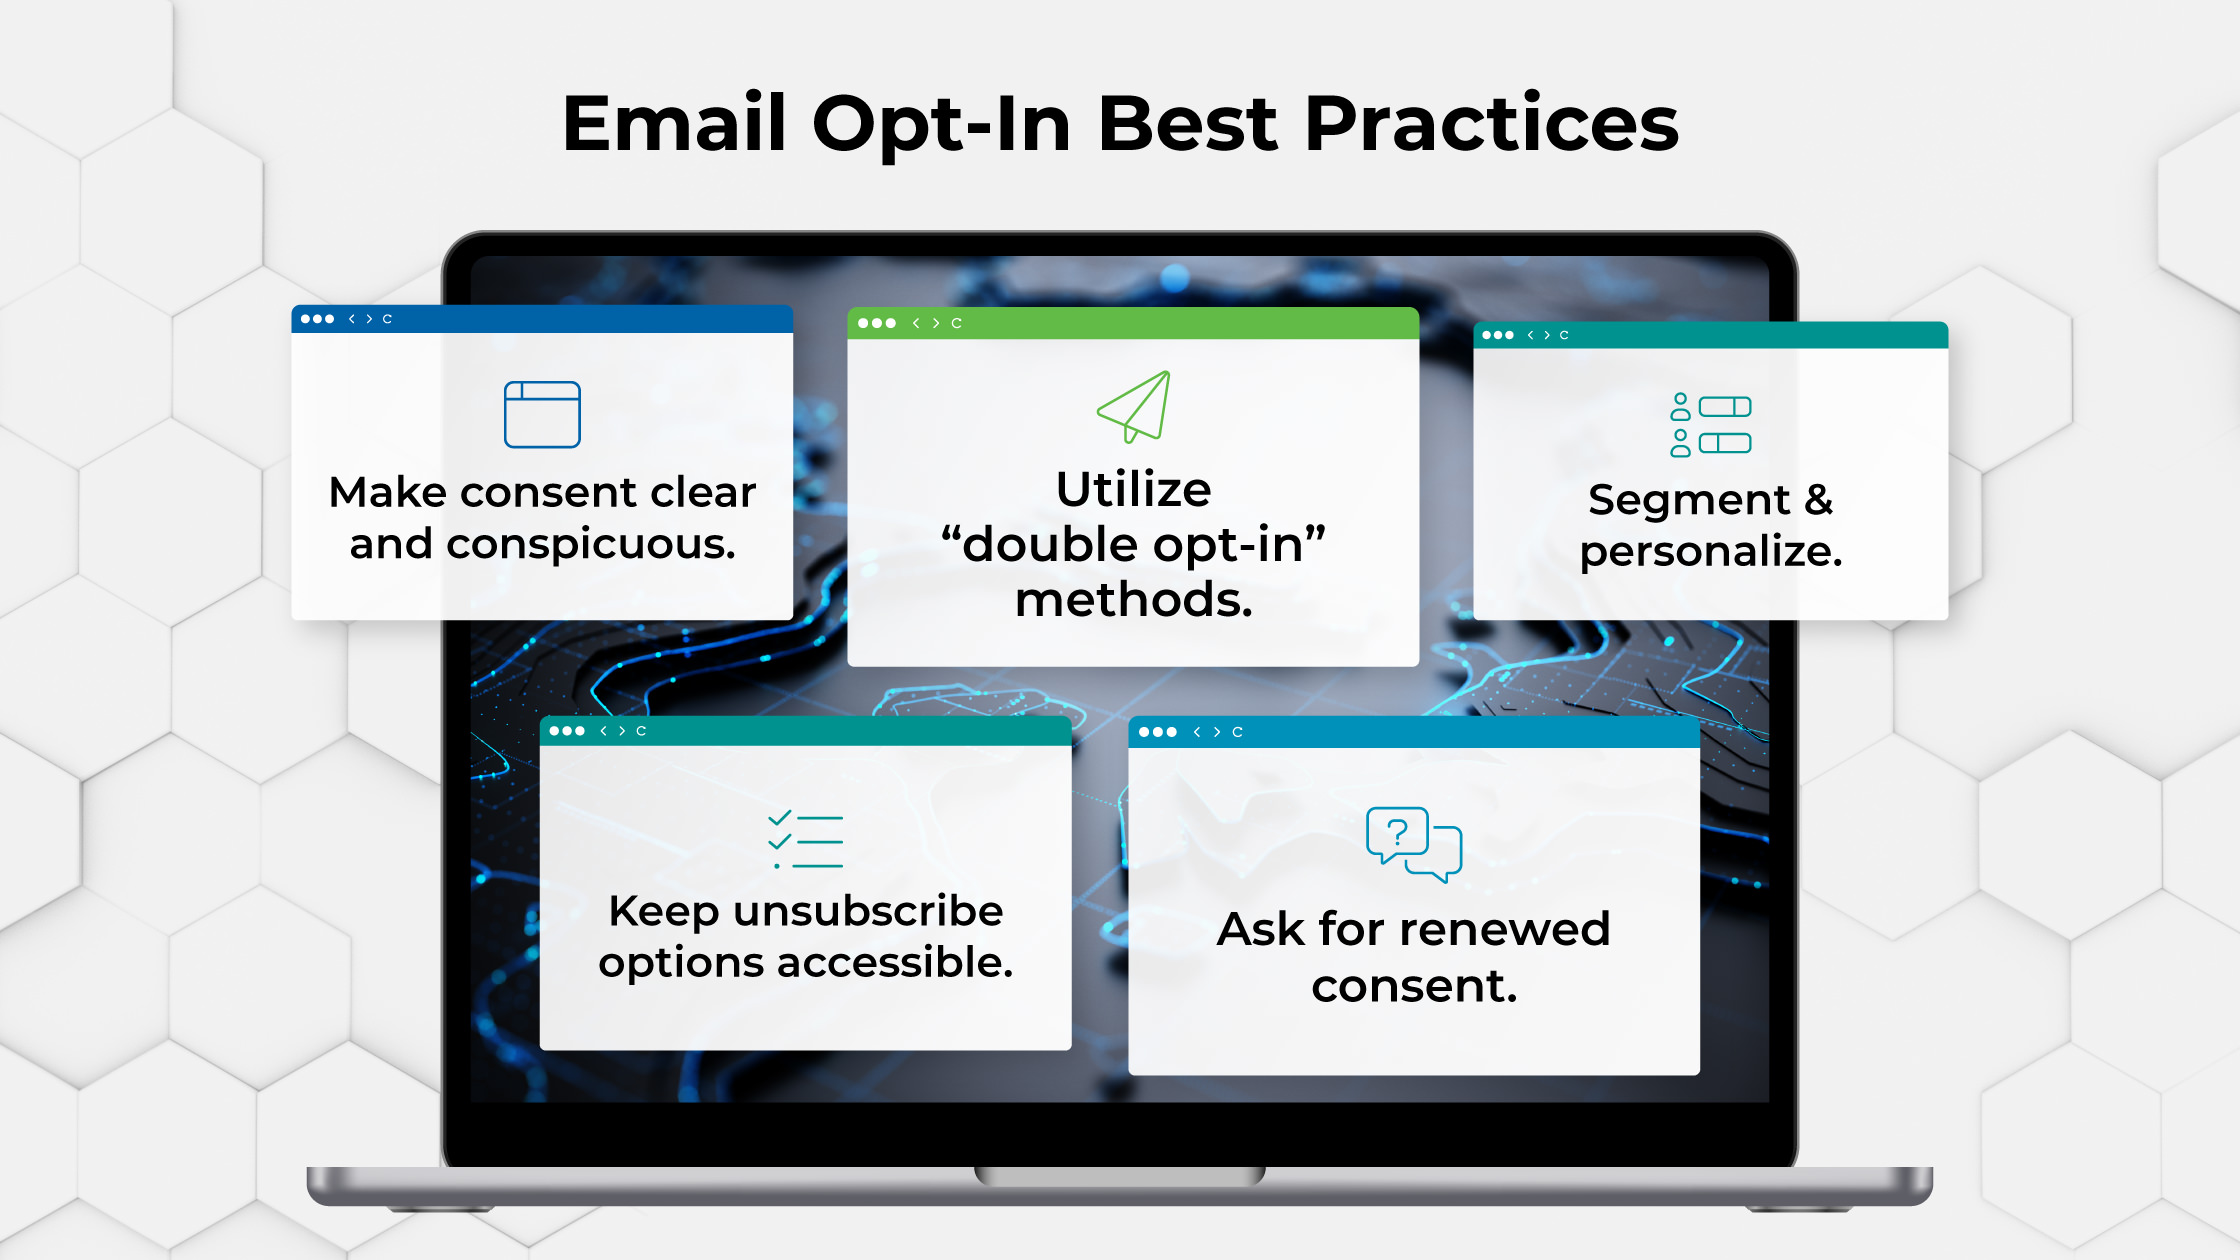 Email Opt-In Best Practices